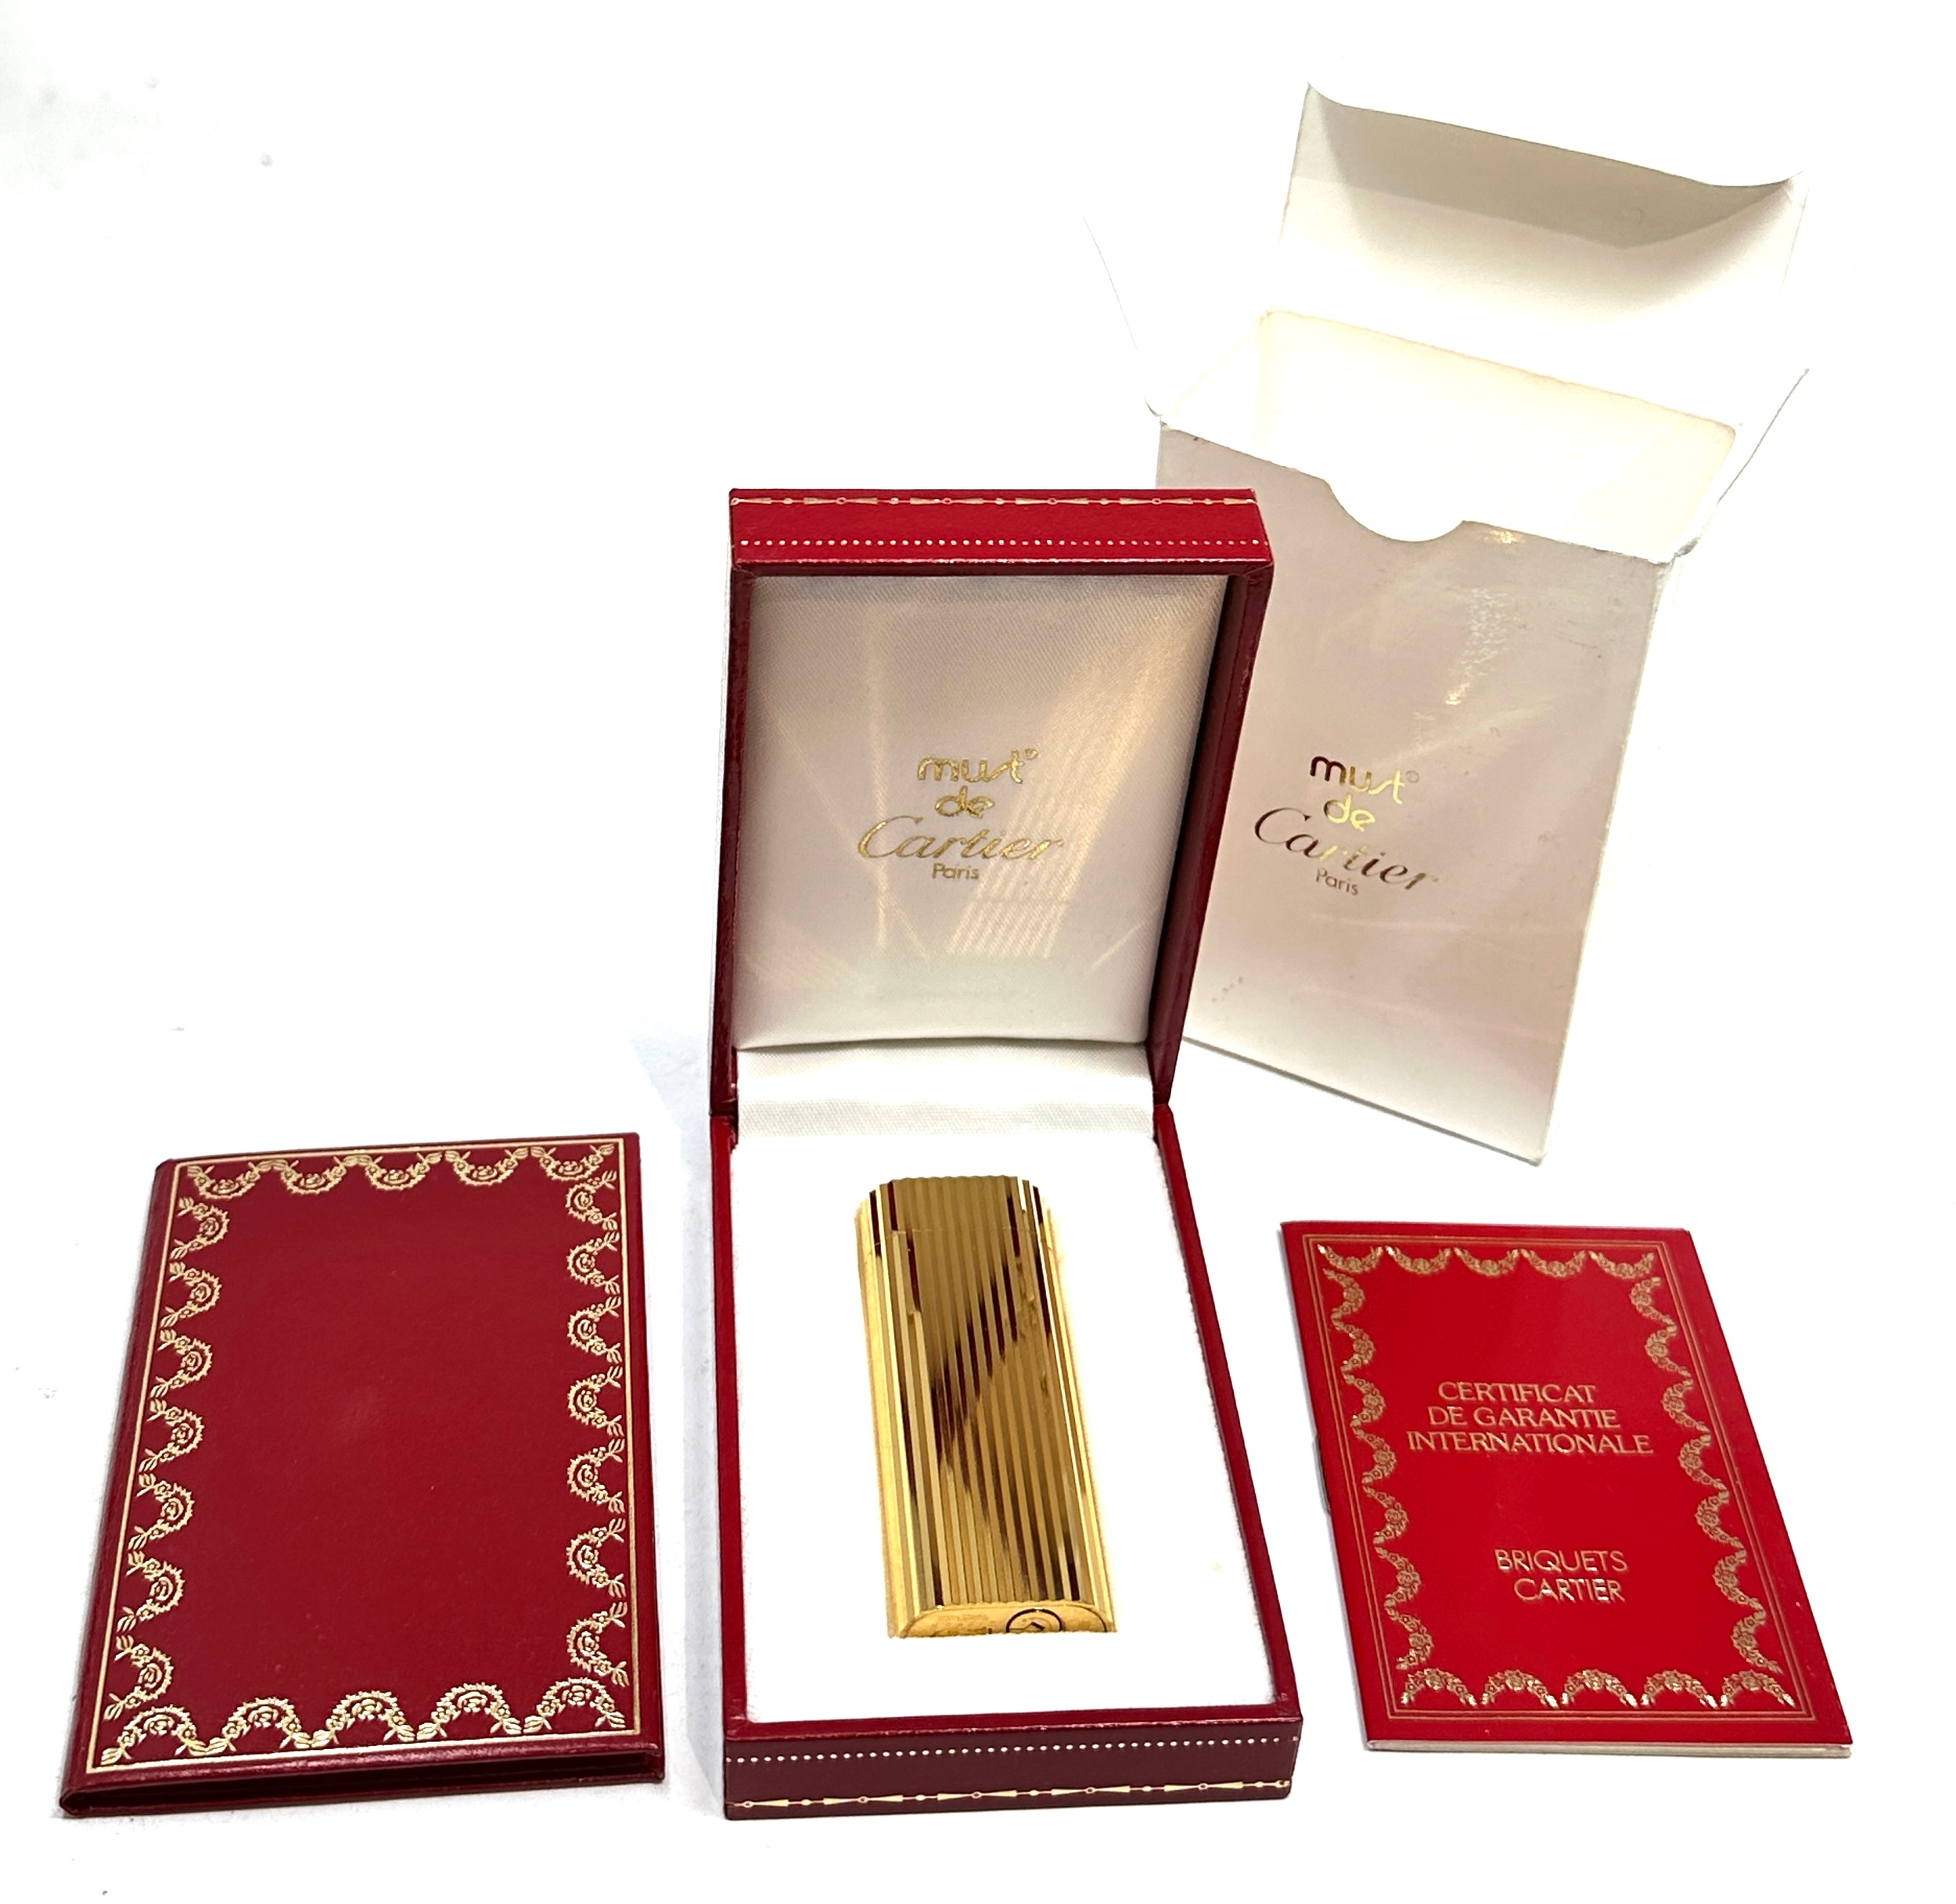 Original boxed Cartier cigarette lighter in as new condition complete with boxes and booklet